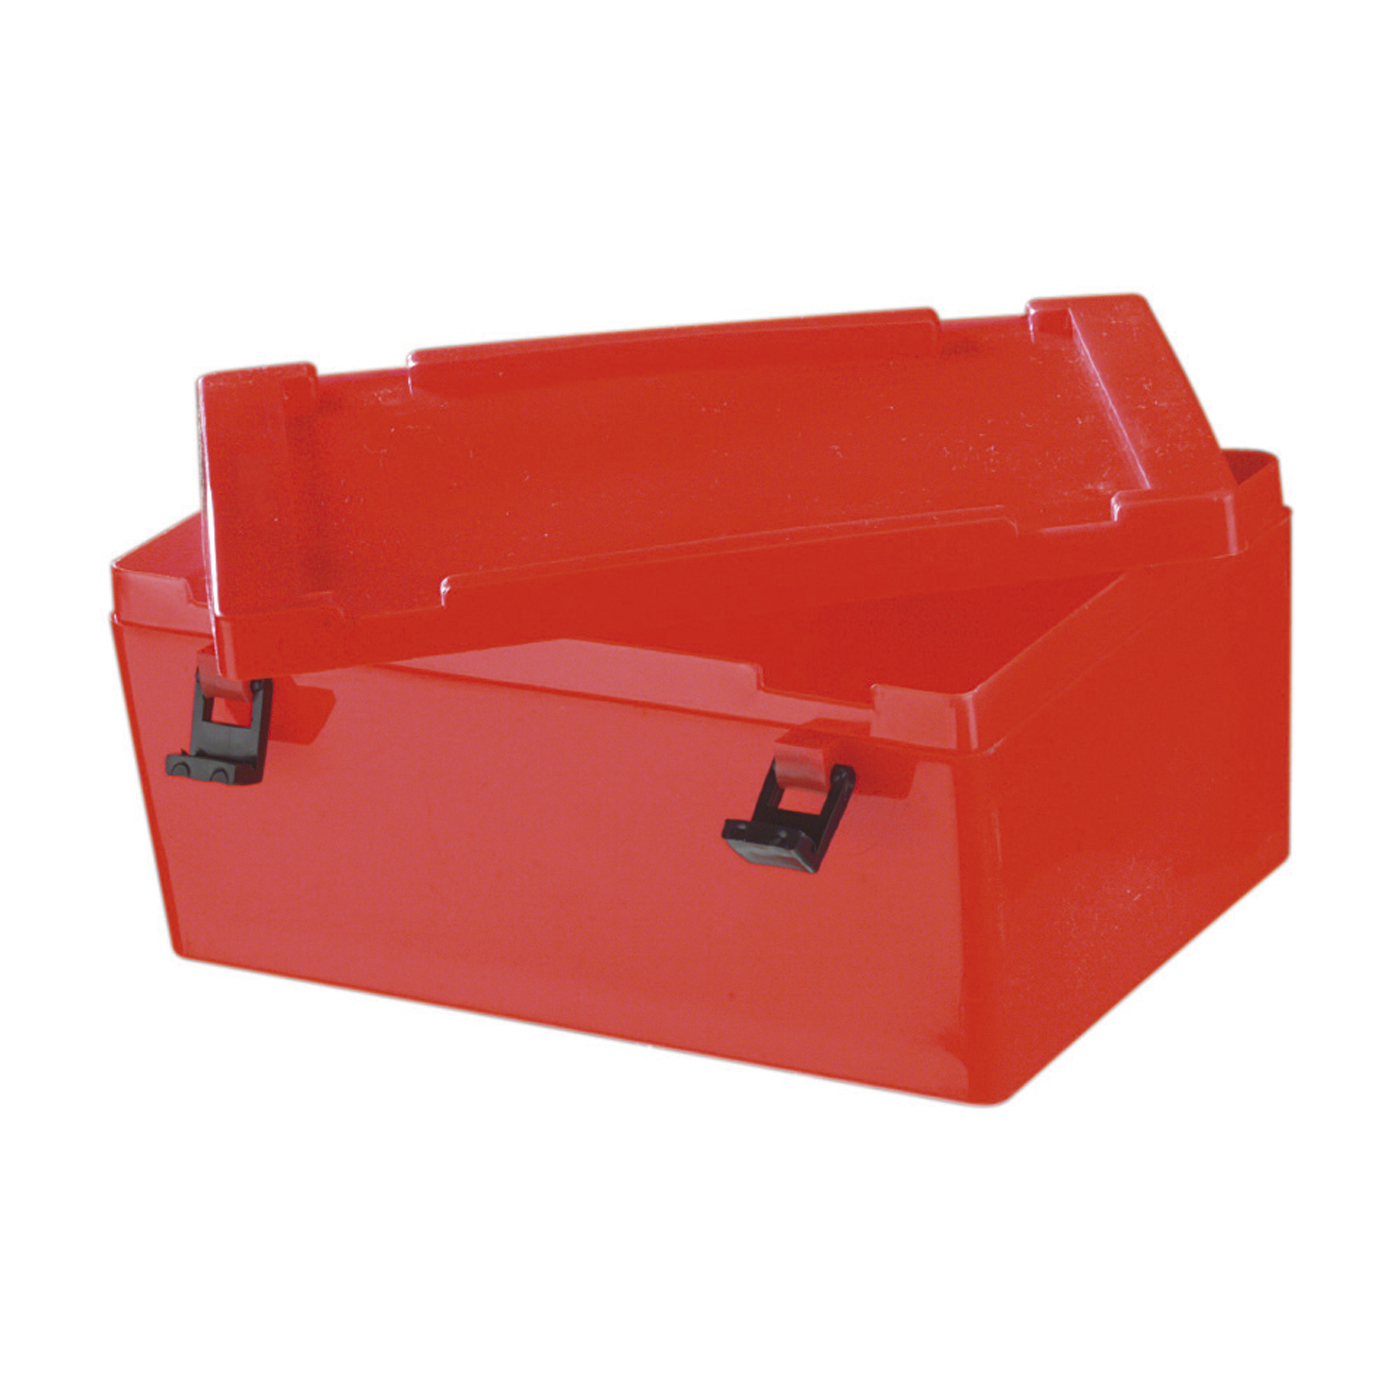 Dispatch Container, 1.3 l, Red - 1 piece